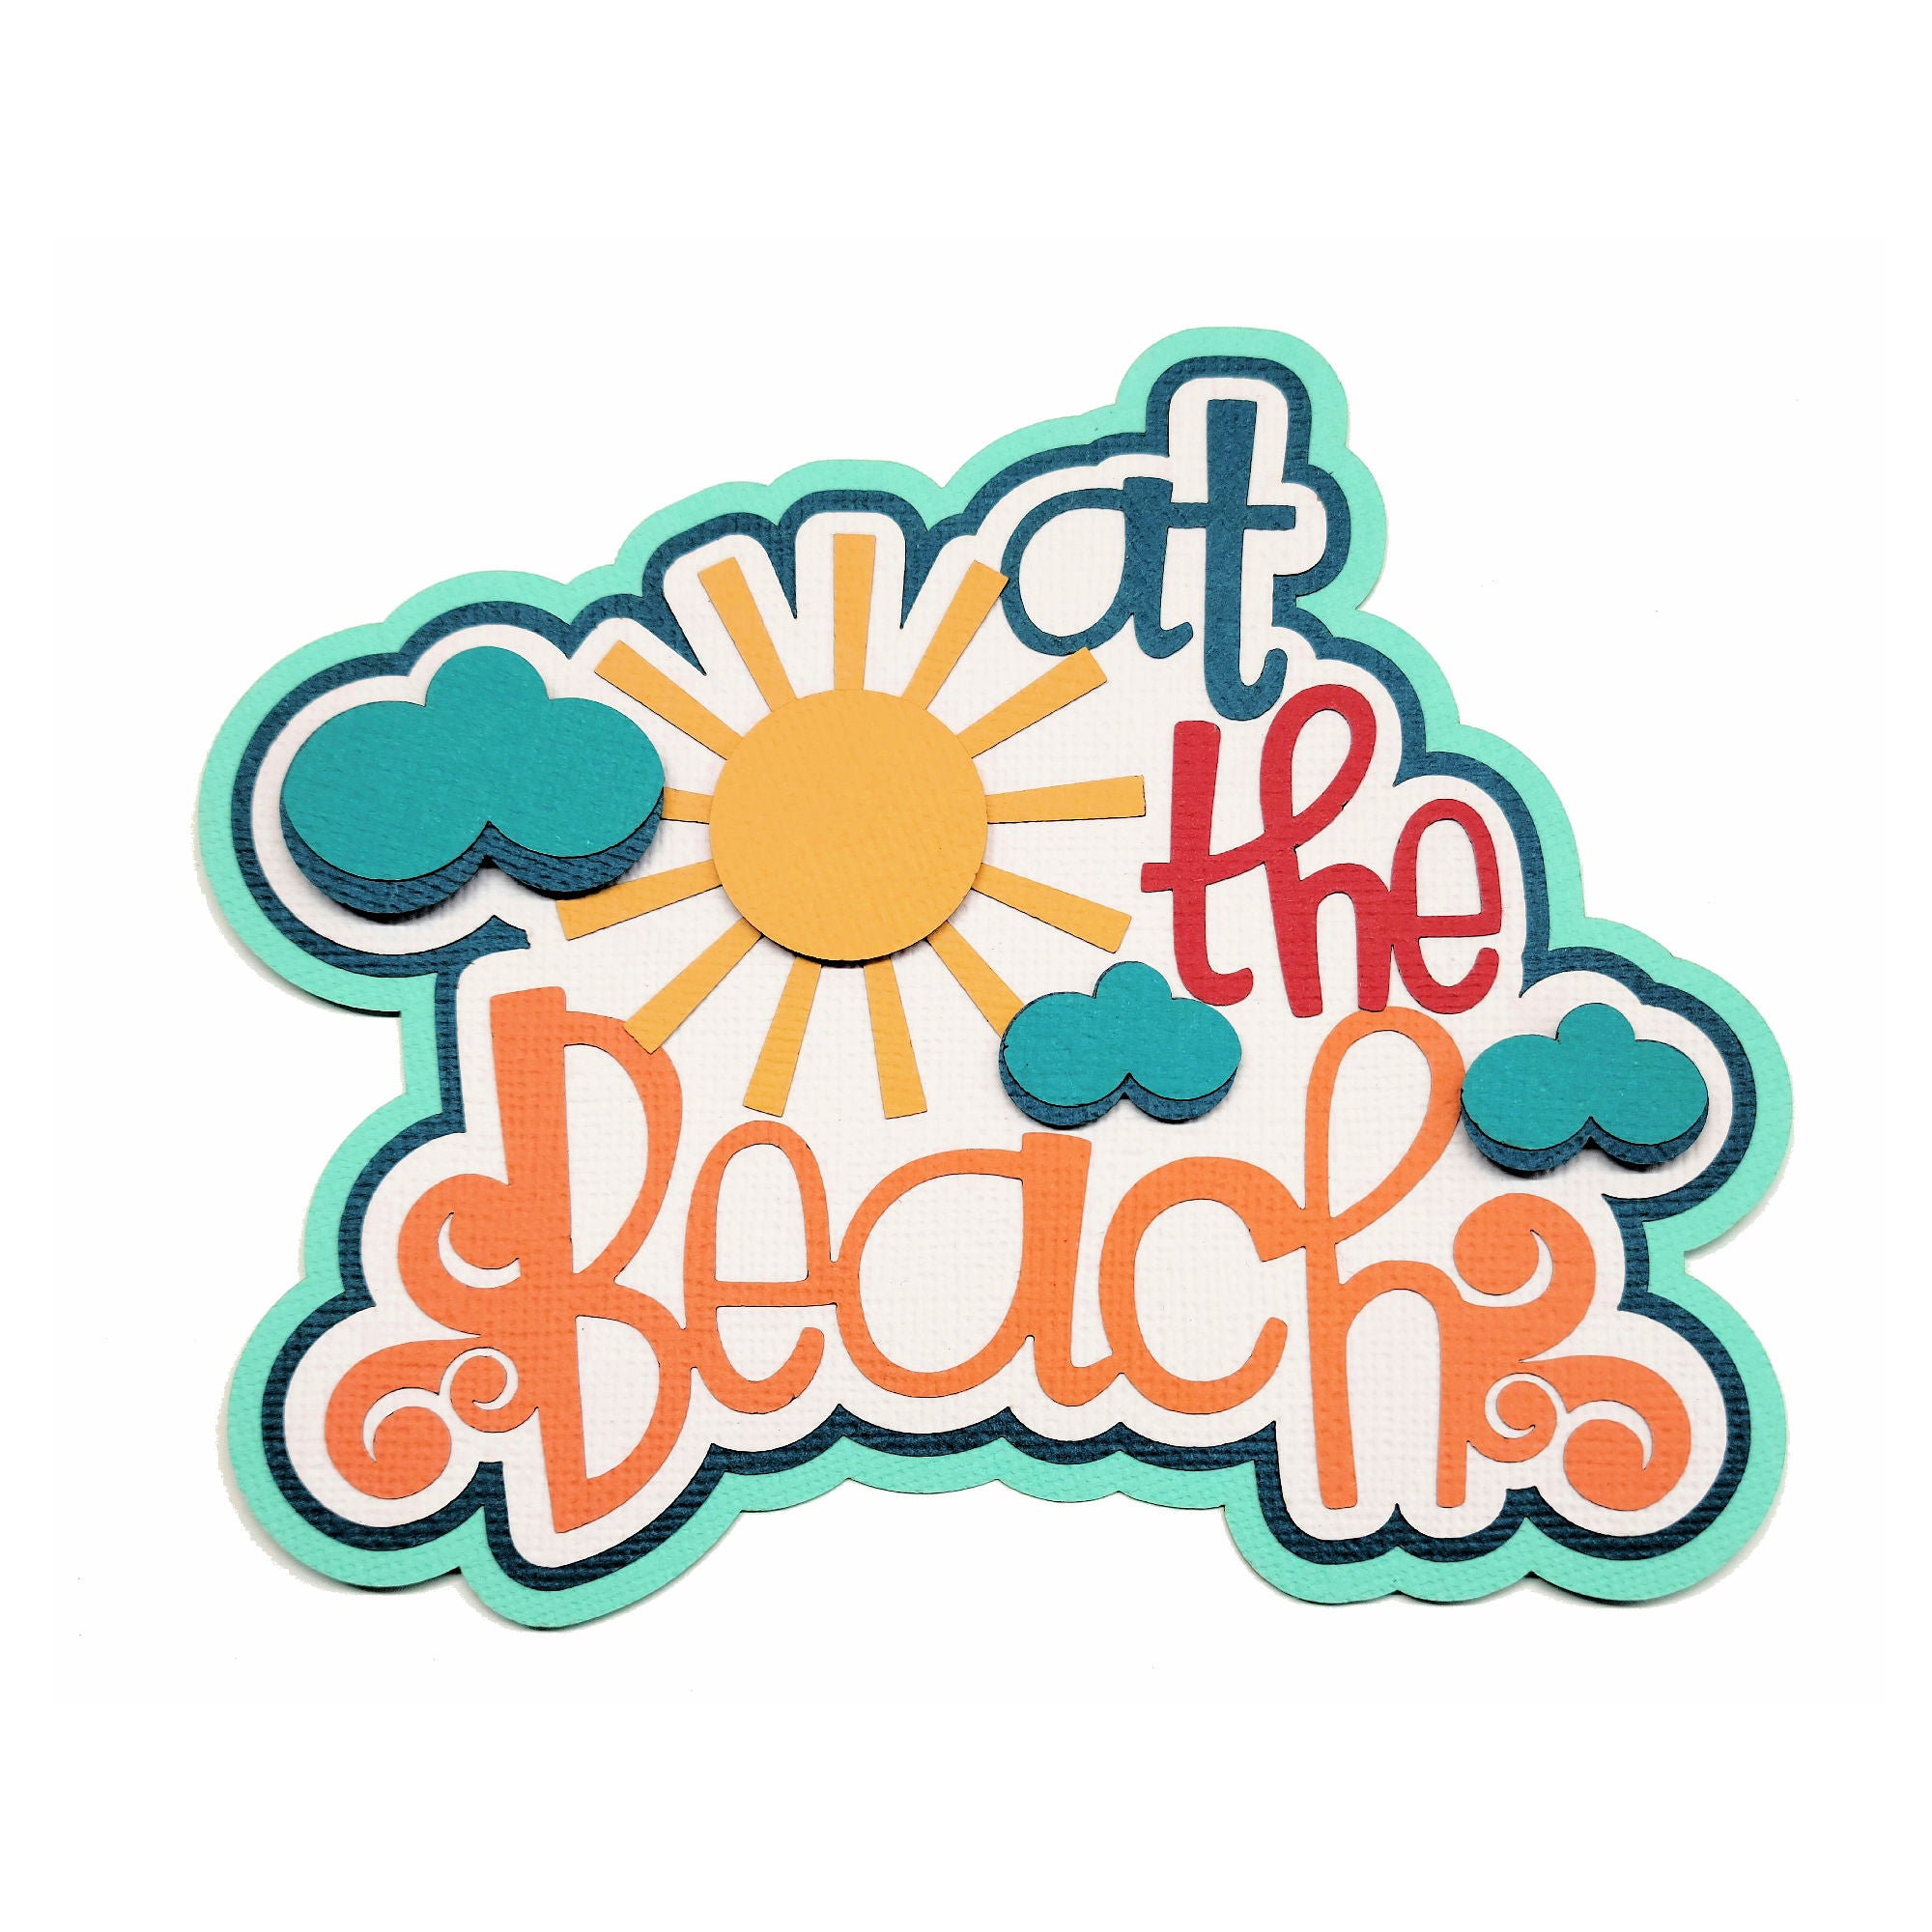 At The Beach Title Fully-Assembled Laser Cut Scrapbook Embellishment by SSC Laser Designs